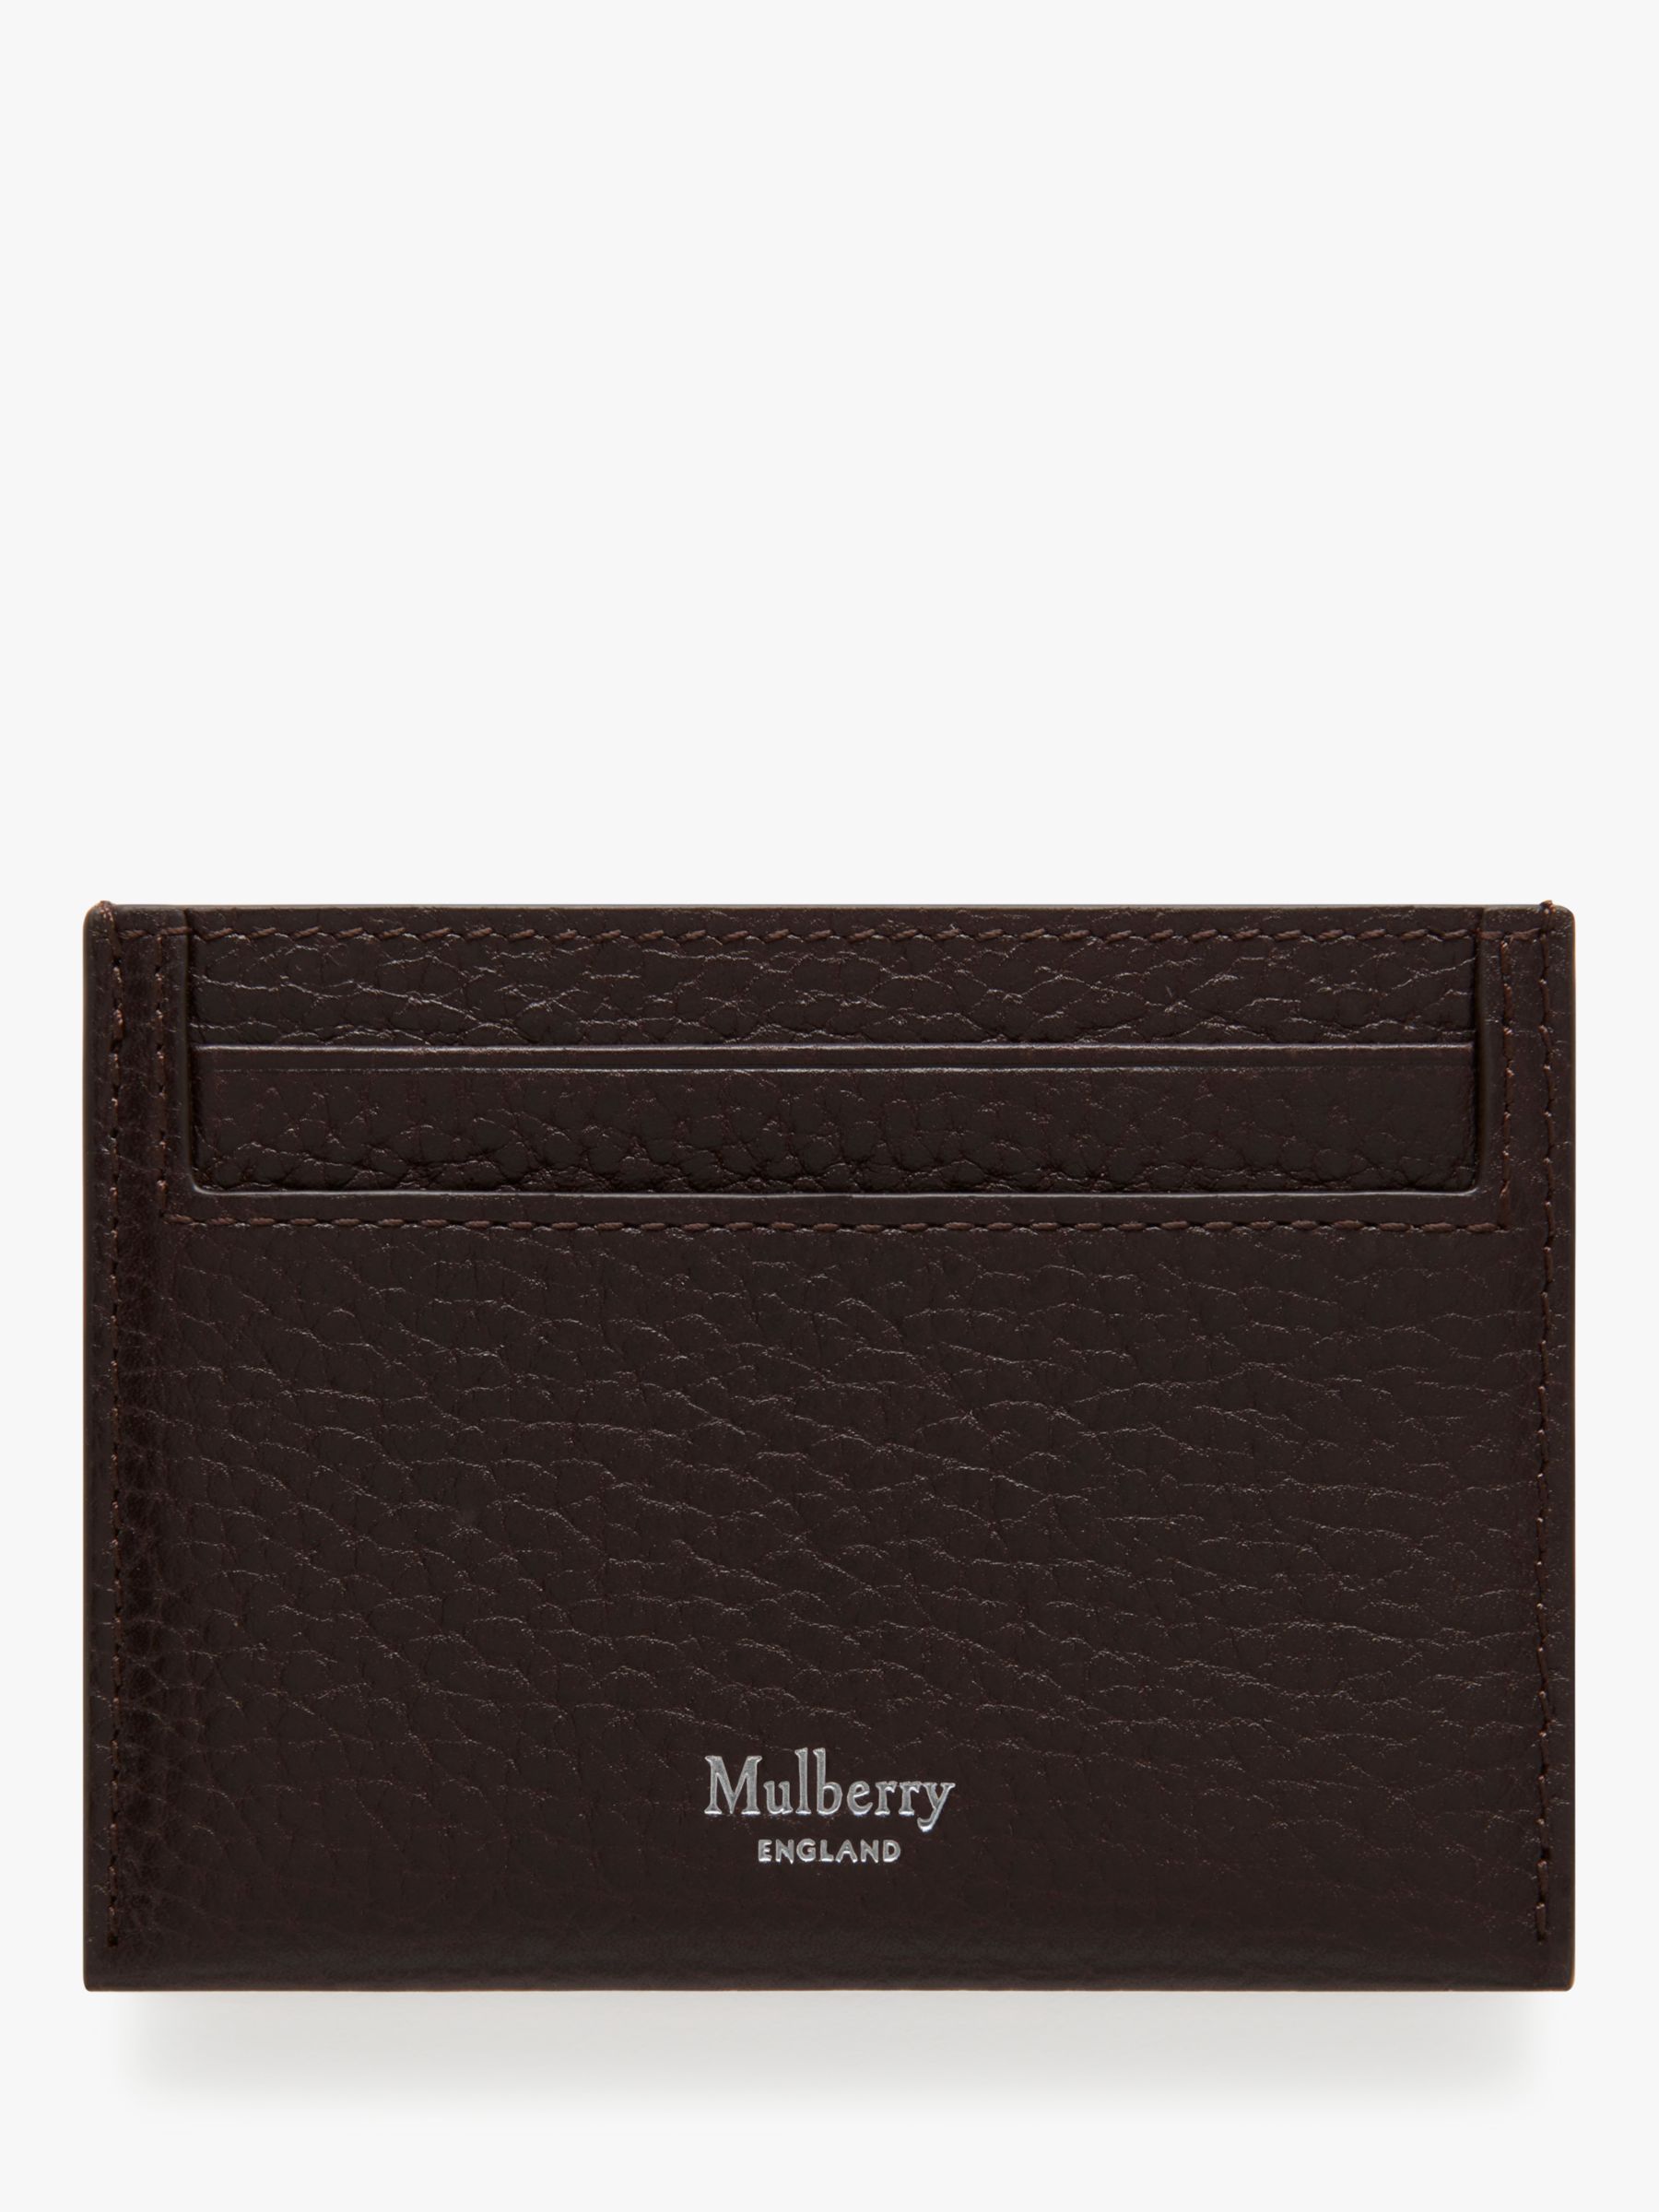 Mulberry Grain Veg Tanned Leather Credit Card Slip, Chocolate